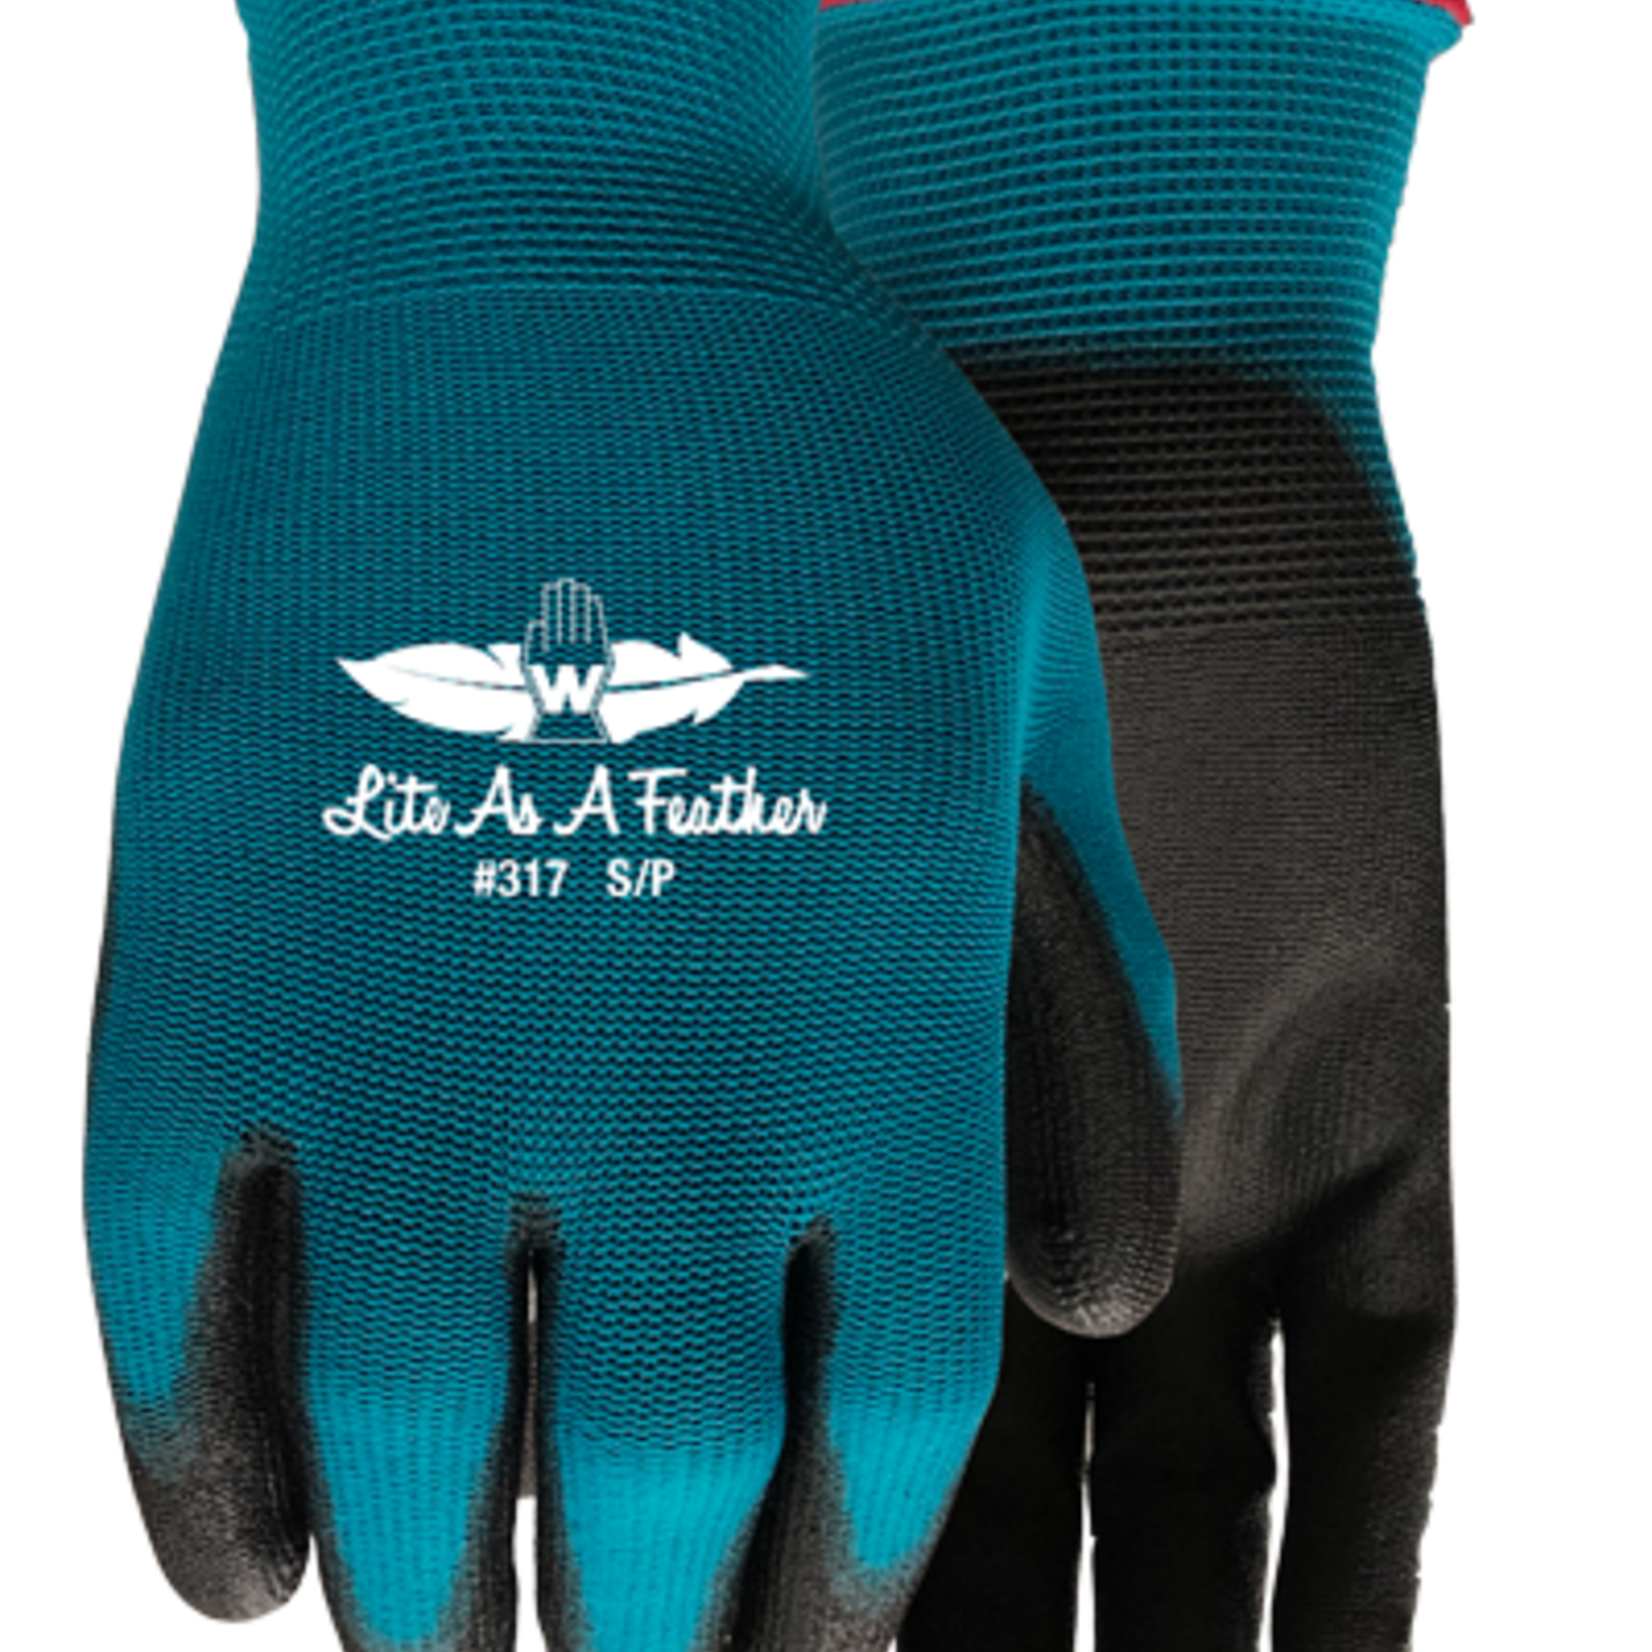 Lite As A Feather Garden Glove- Large